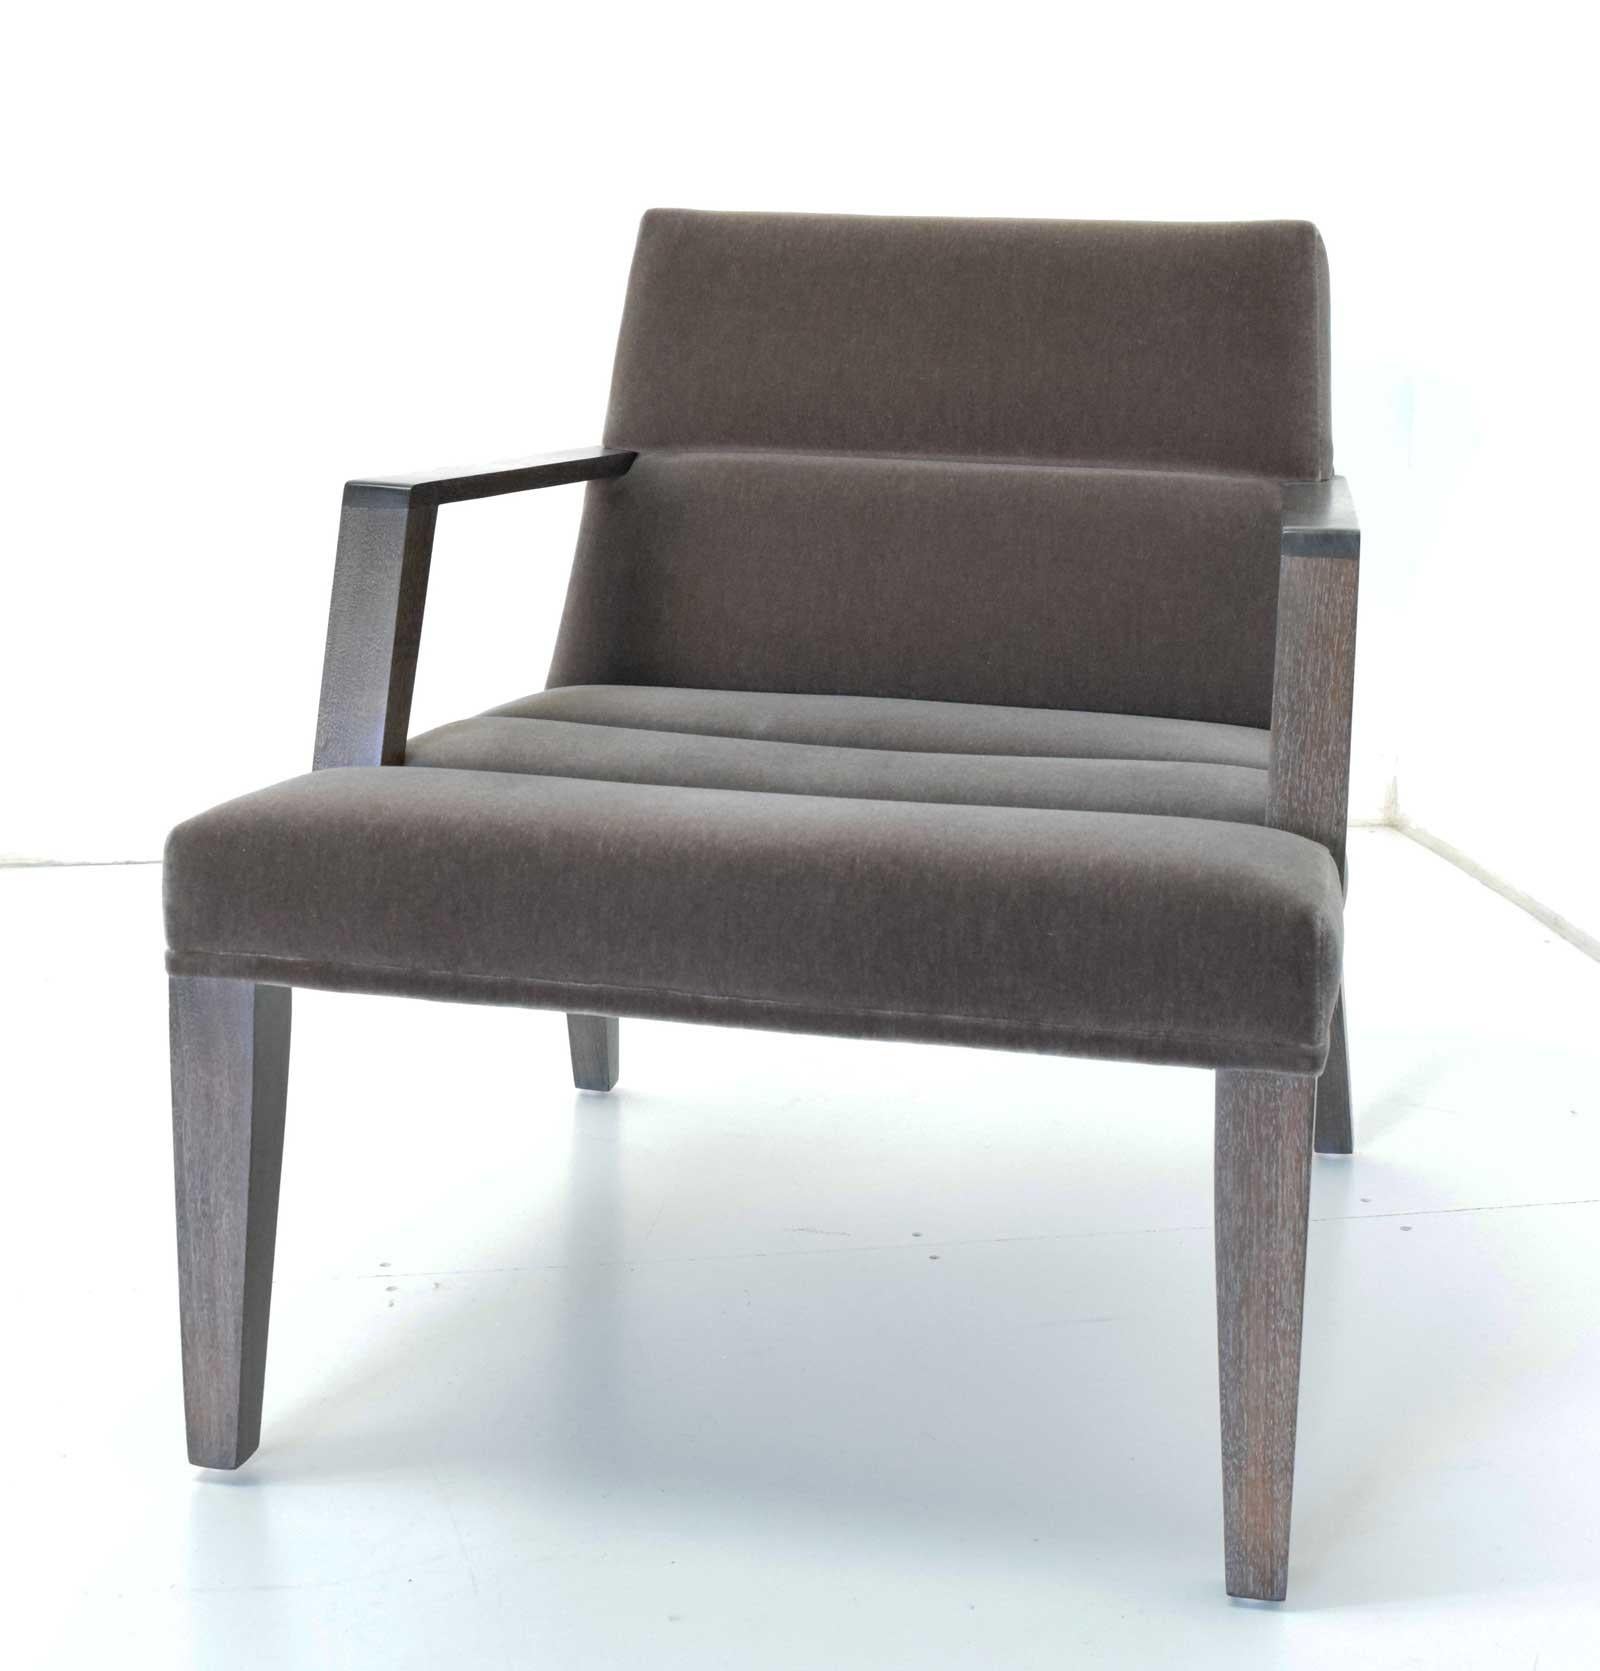 Well cared for the Elana chair by Bright in a taupe mohair.